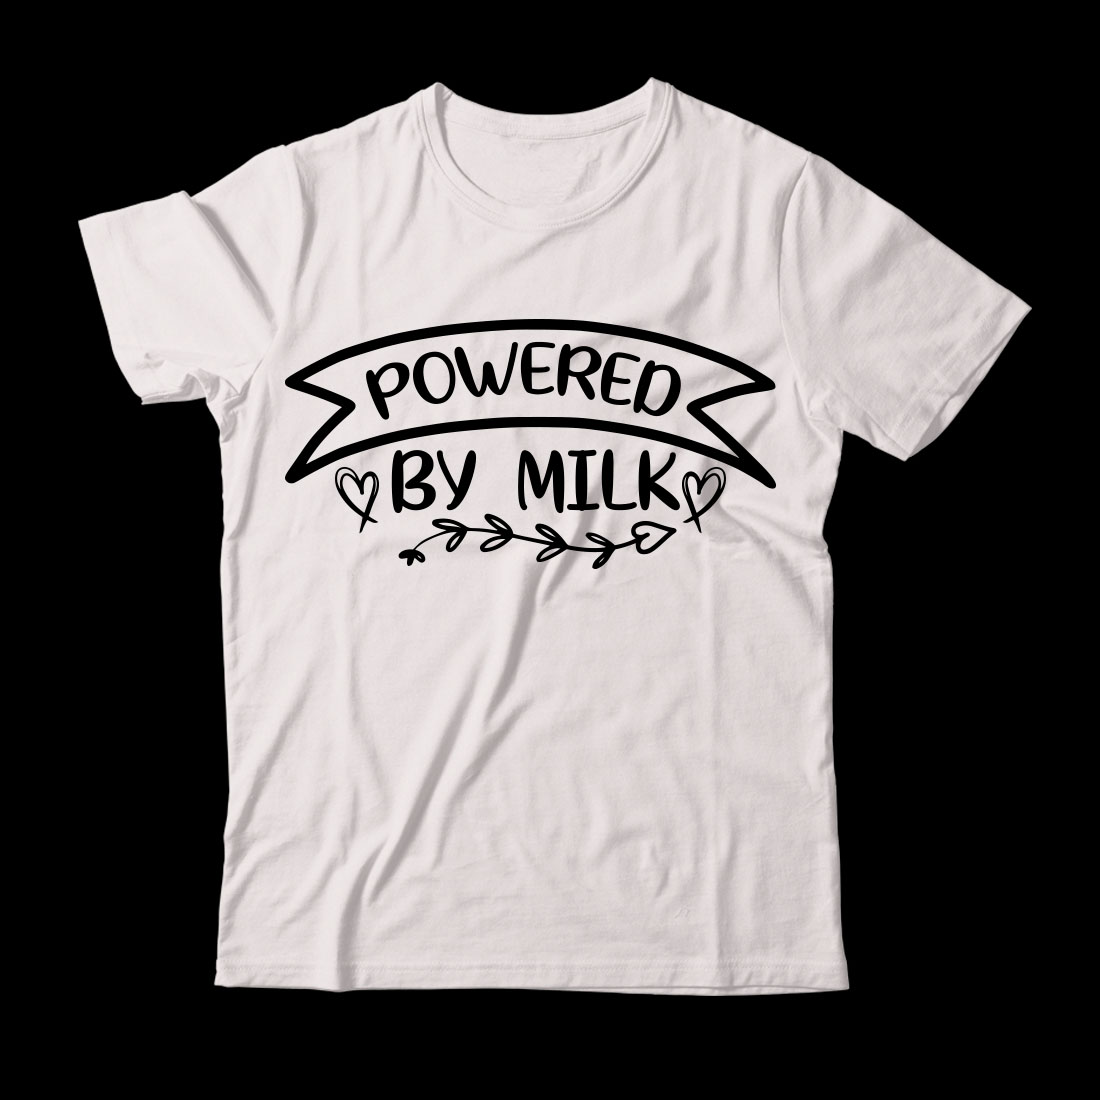 White t - shirt that says powered by milk.